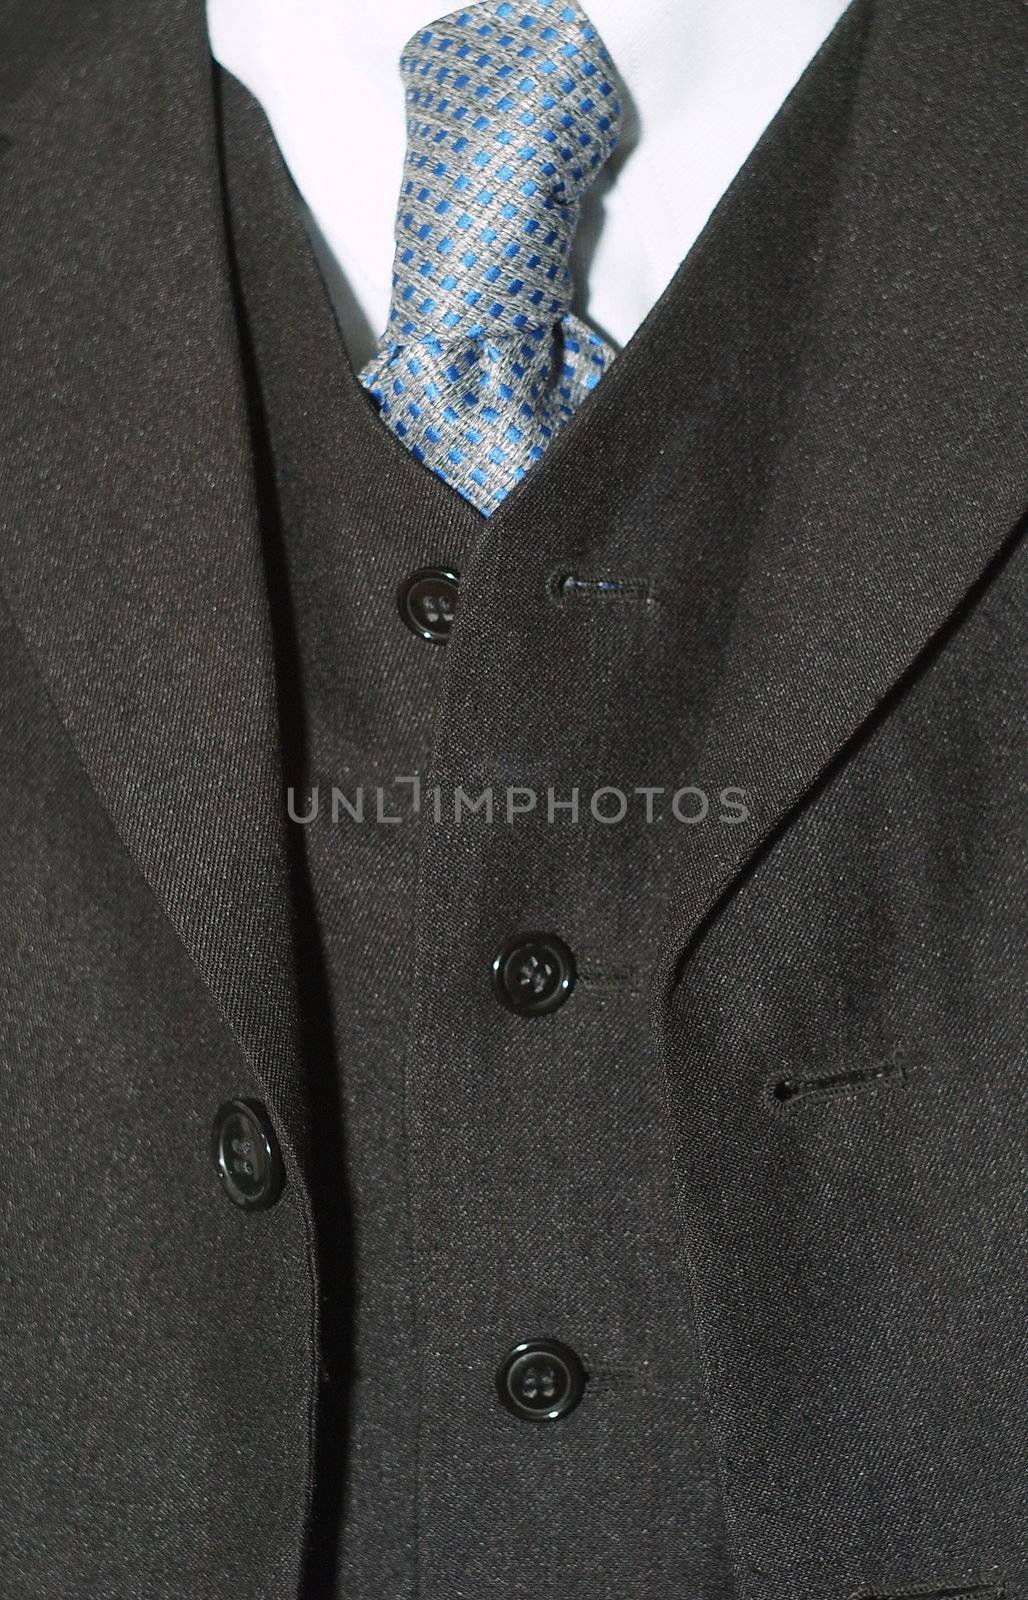 Tie of a business man by anderm